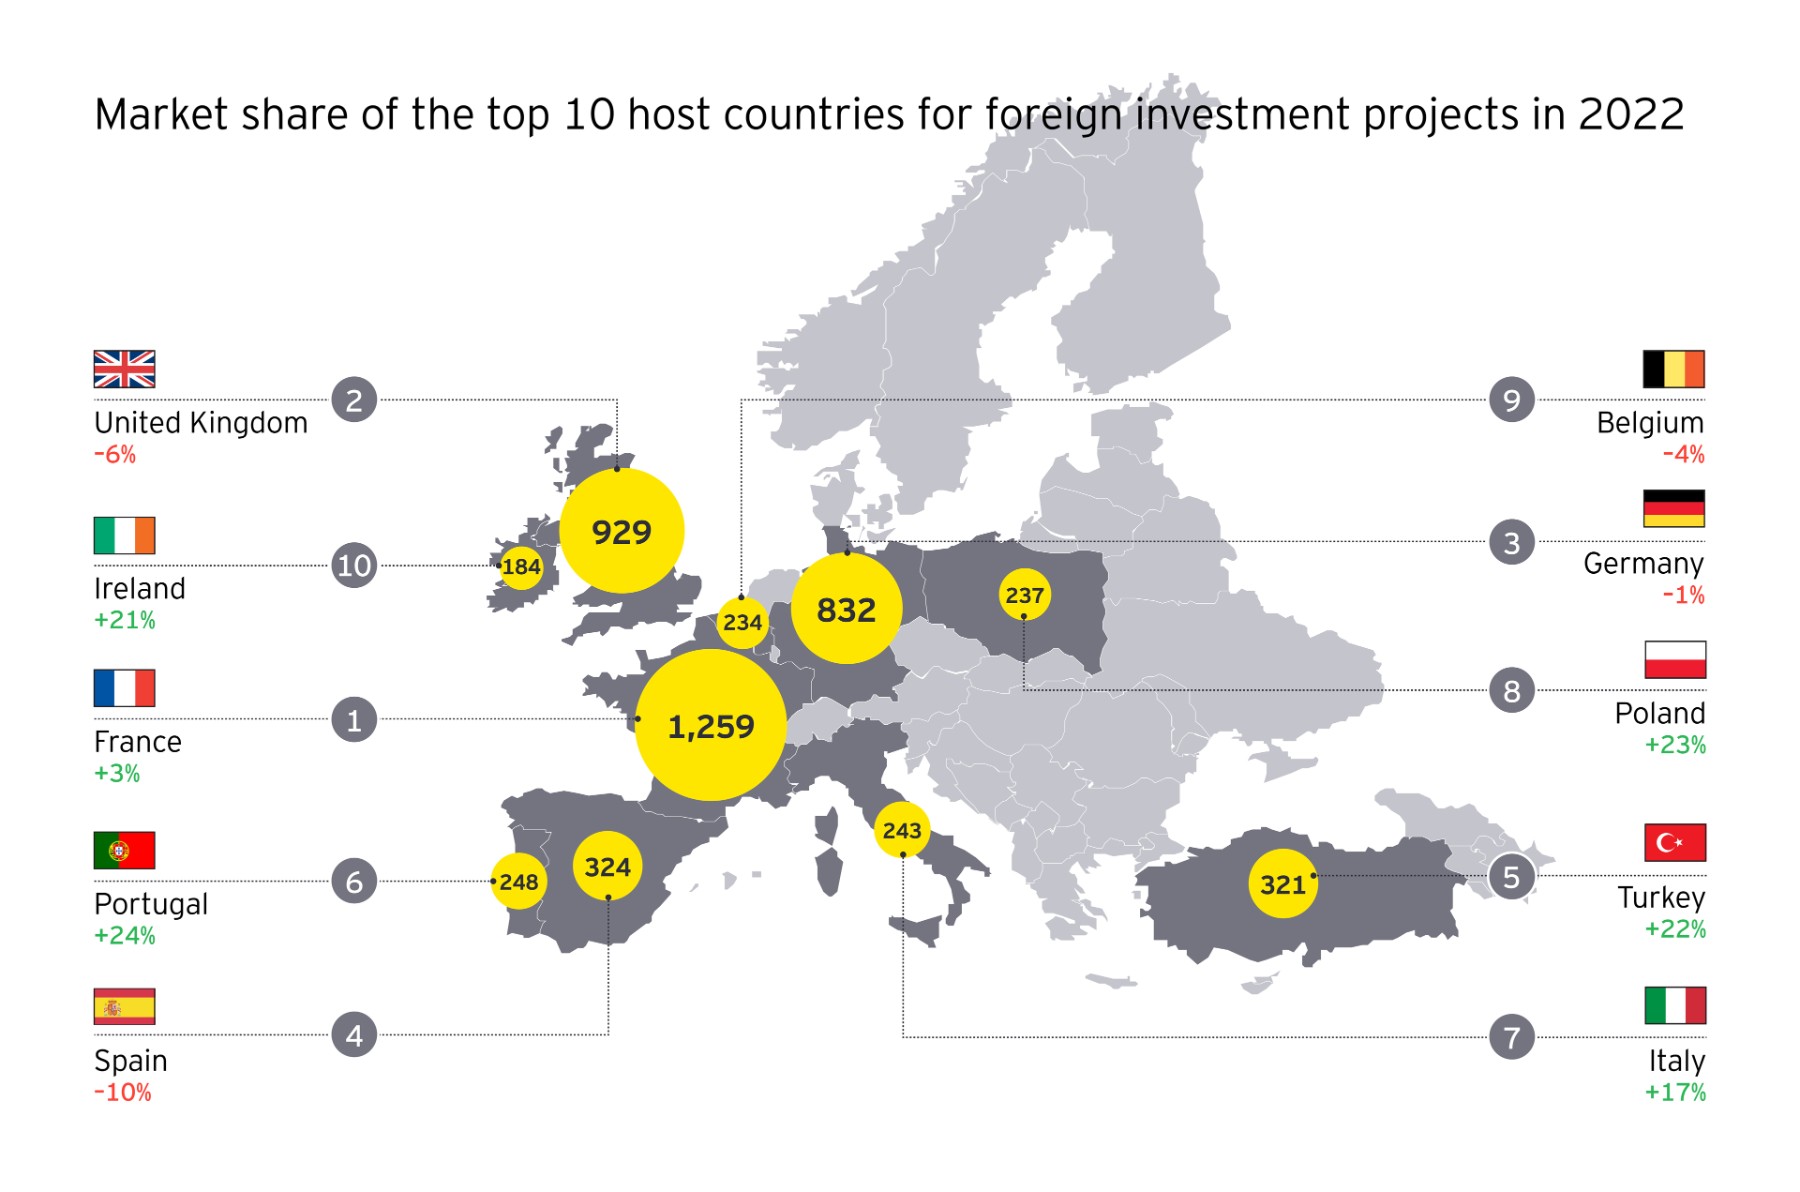 ey-europe-attractiveness-article-map-chart-v3.jpg.rendition.1800.1200.jpg